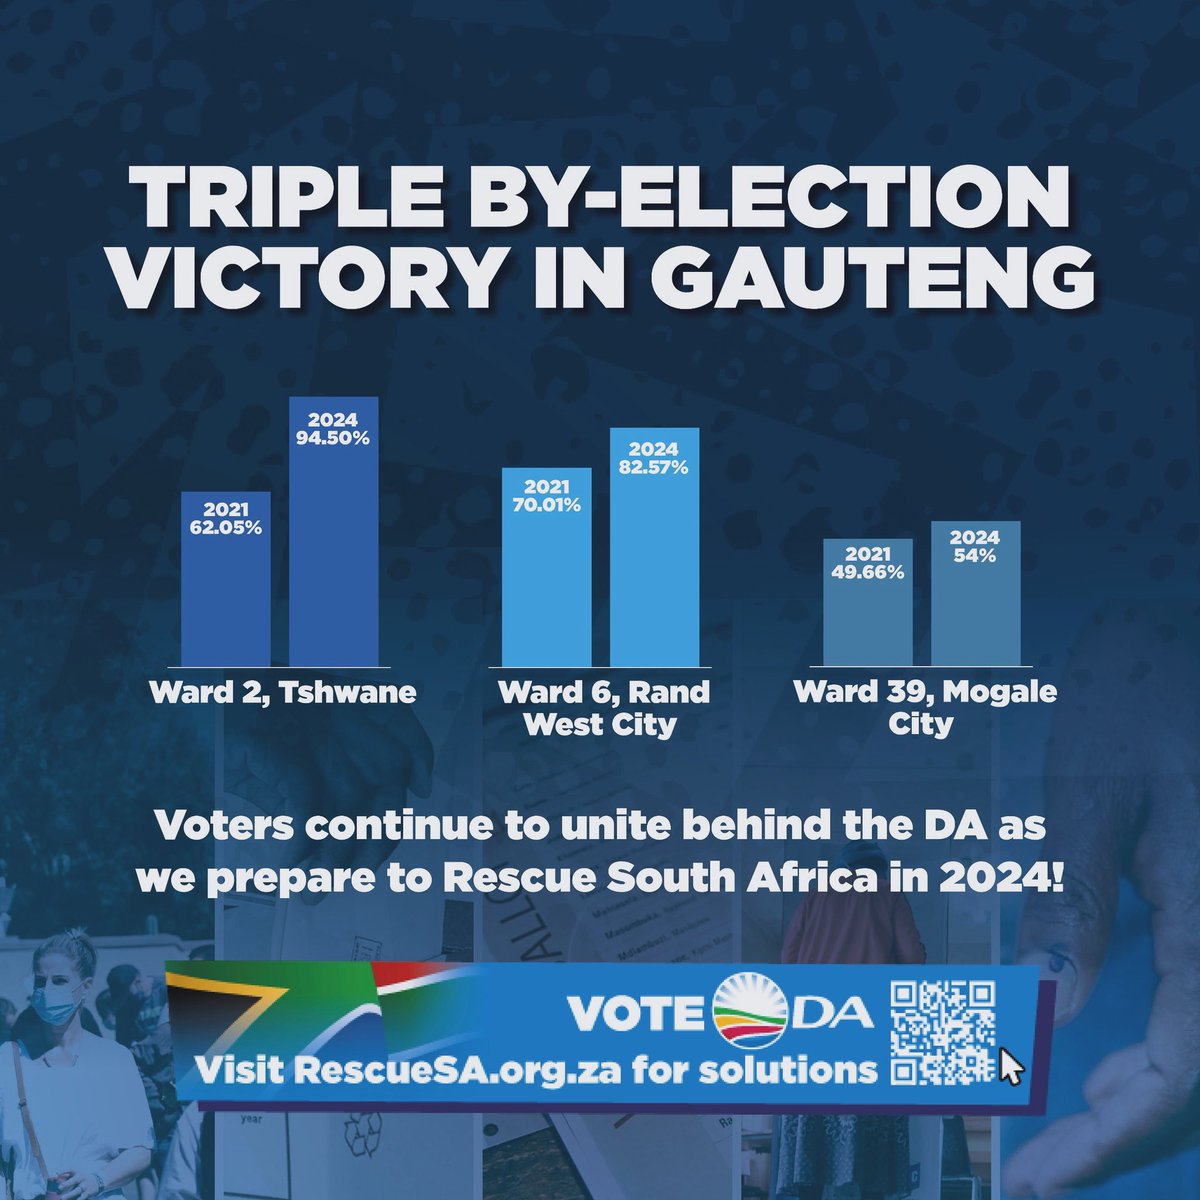 We have to brag a bit about this one… 👇

Last week we celebrated a TRIPLE by-election victory in Gauteng. 🗳️

We keep growing, and support keeps mounting behind the DA. That is a fact.

On the 29th of May be a part of the change, and #VoteDA to #RescueSA